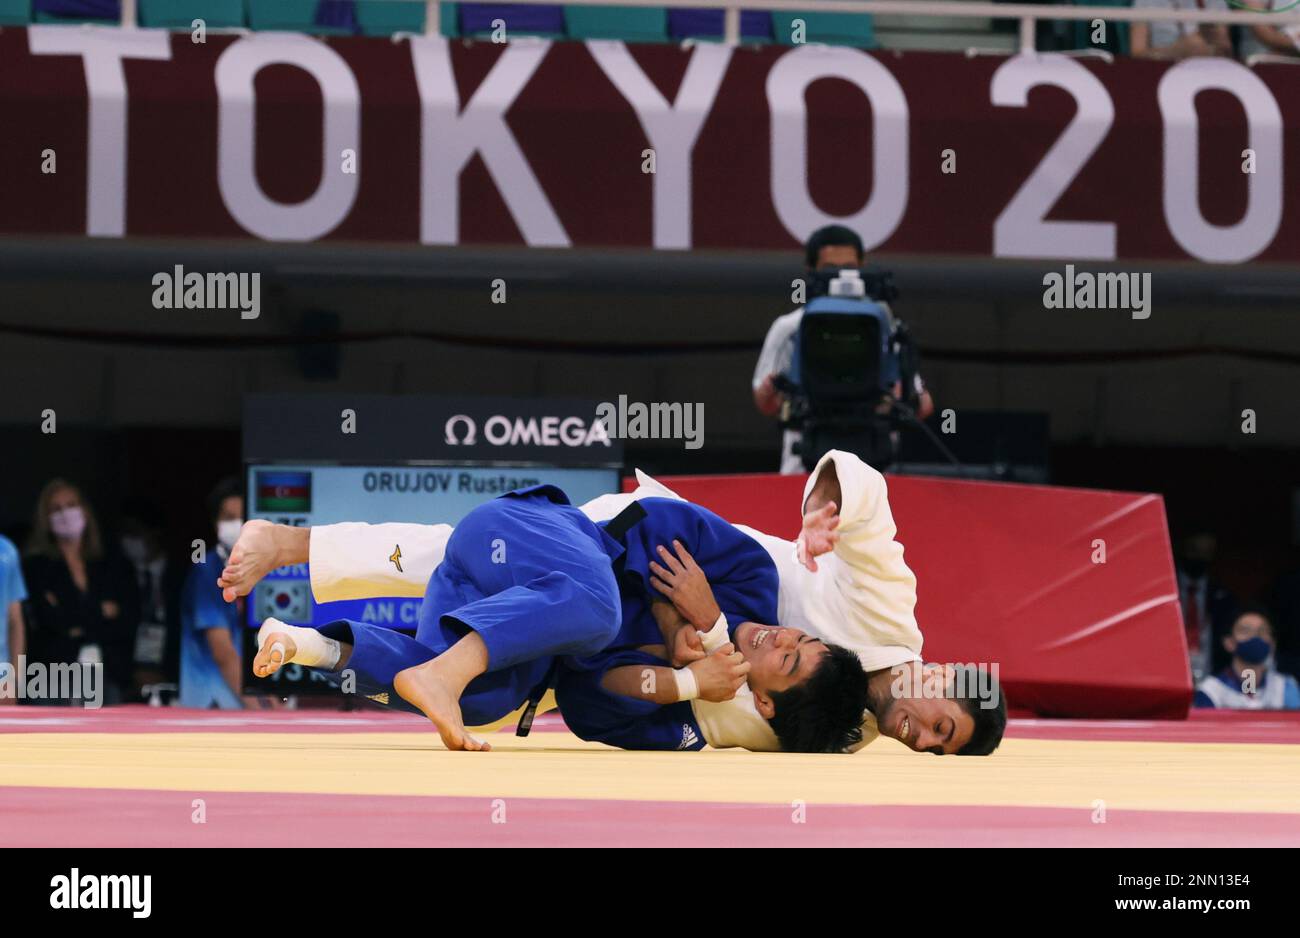 AN Changrim of Korea competes during Judo mens -73kg contest for bronze medal against ORUJOV Rustam of Azerbaijan at Nippon Budokan in Tokyo on July 26, 2021